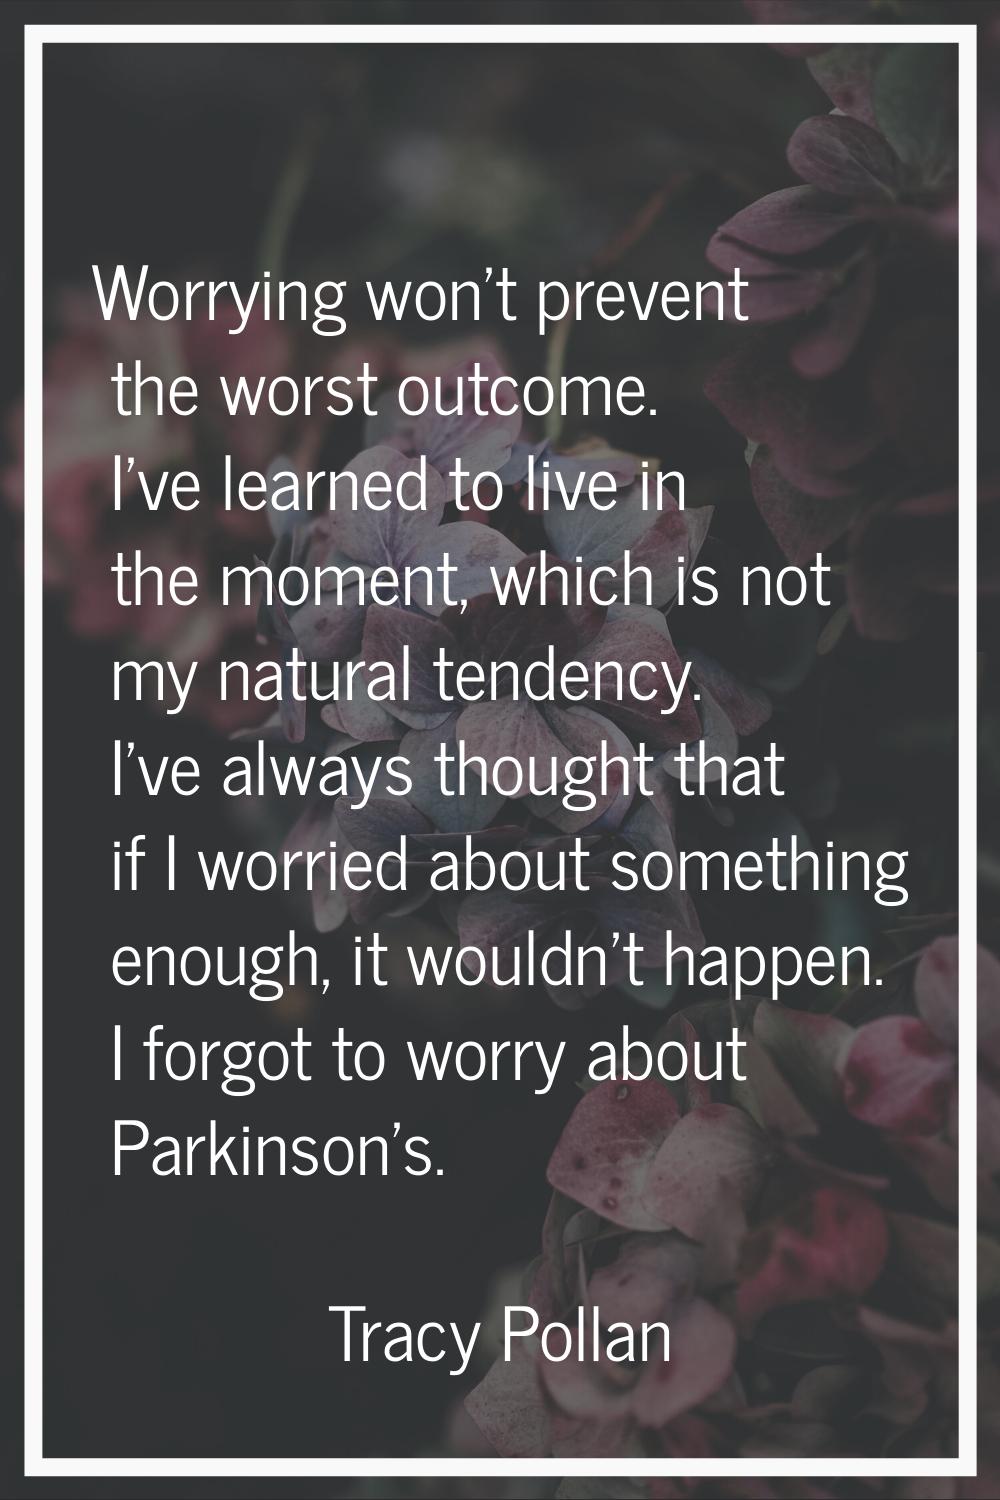 Worrying won't prevent the worst outcome. I've learned to live in the moment, which is not my natur